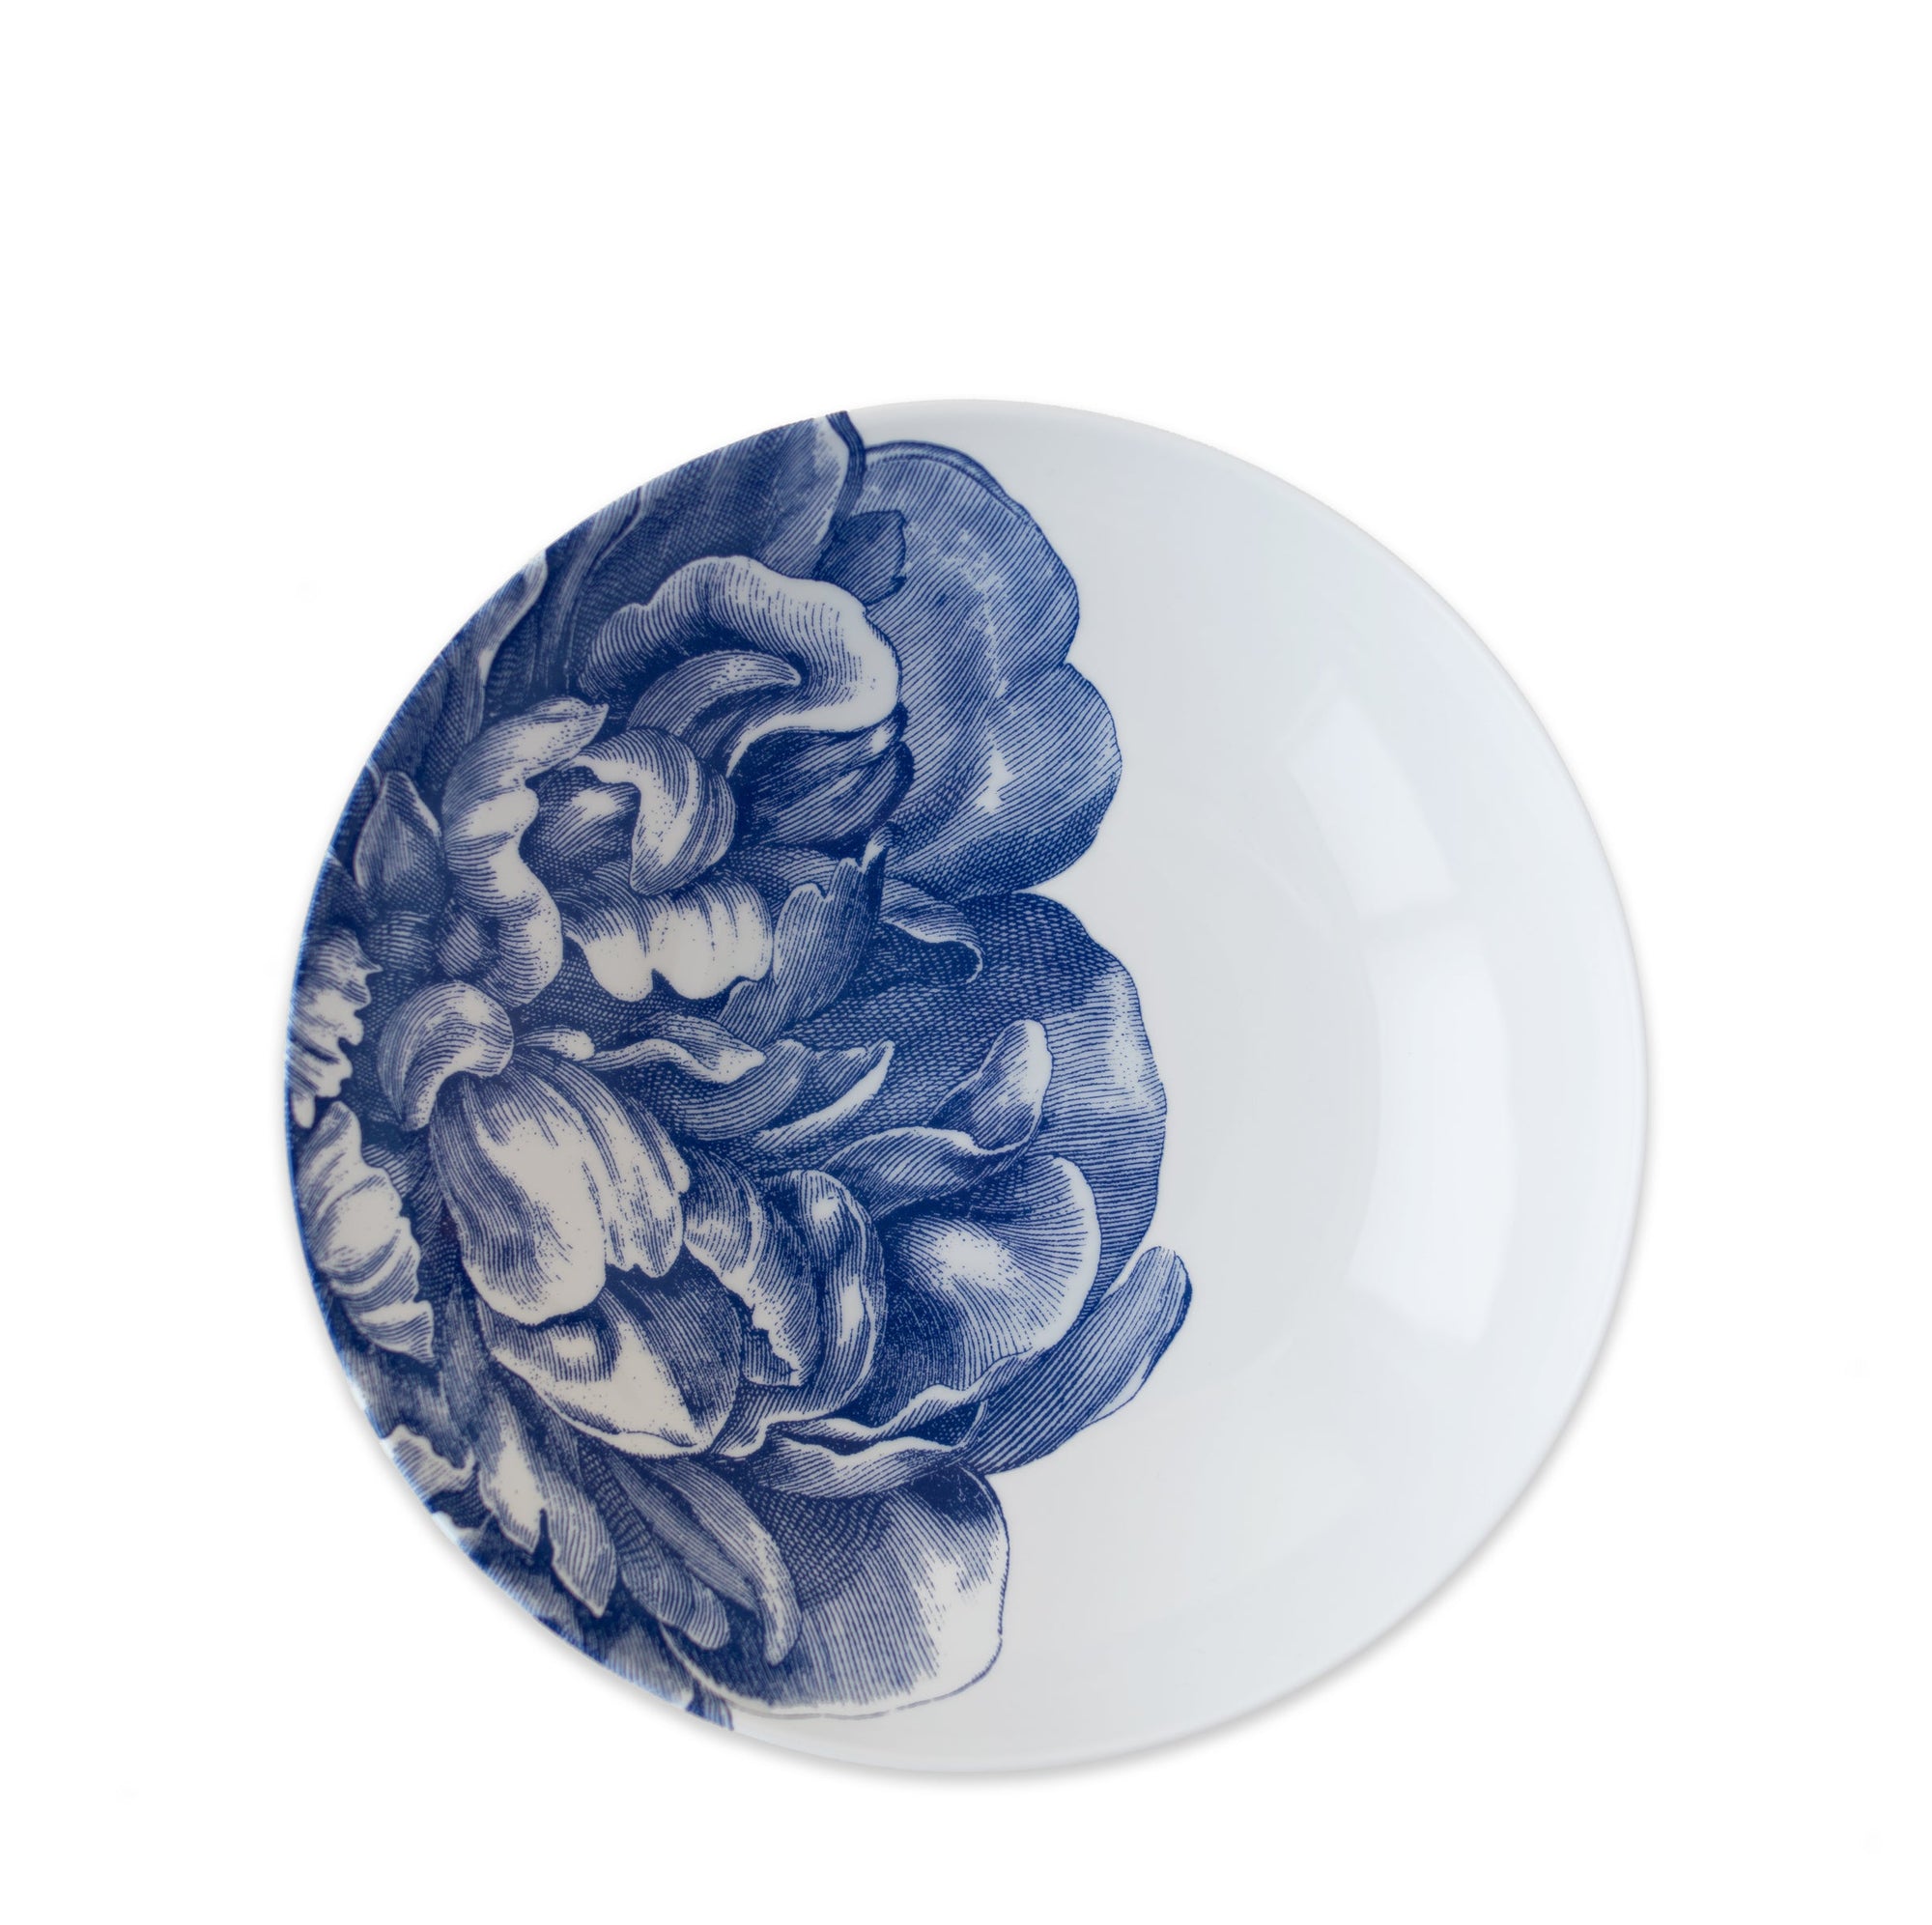 A white premium porcelain Peony Coupe Soup Bowl featuring a detailed blue peony dinnerware design, isolated on a white background by Caskata Artisanal Home.